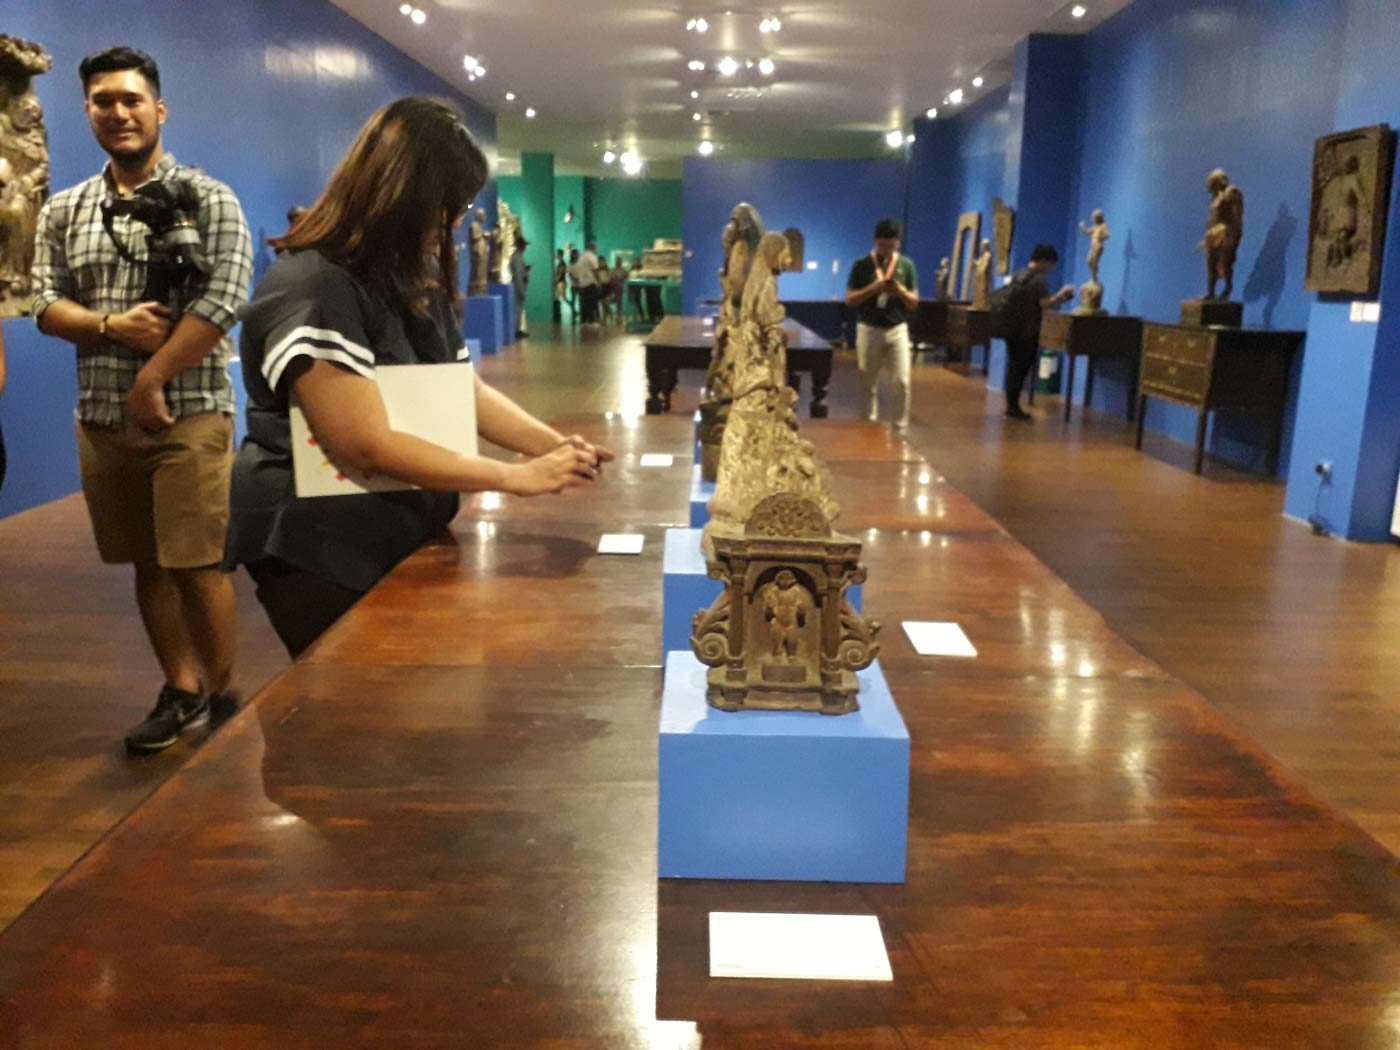 SNEAK PEEK. Members of the media take photos of wooden carvings made by Filipino artists for churches. Photo by Pia Ranada/Rappler 